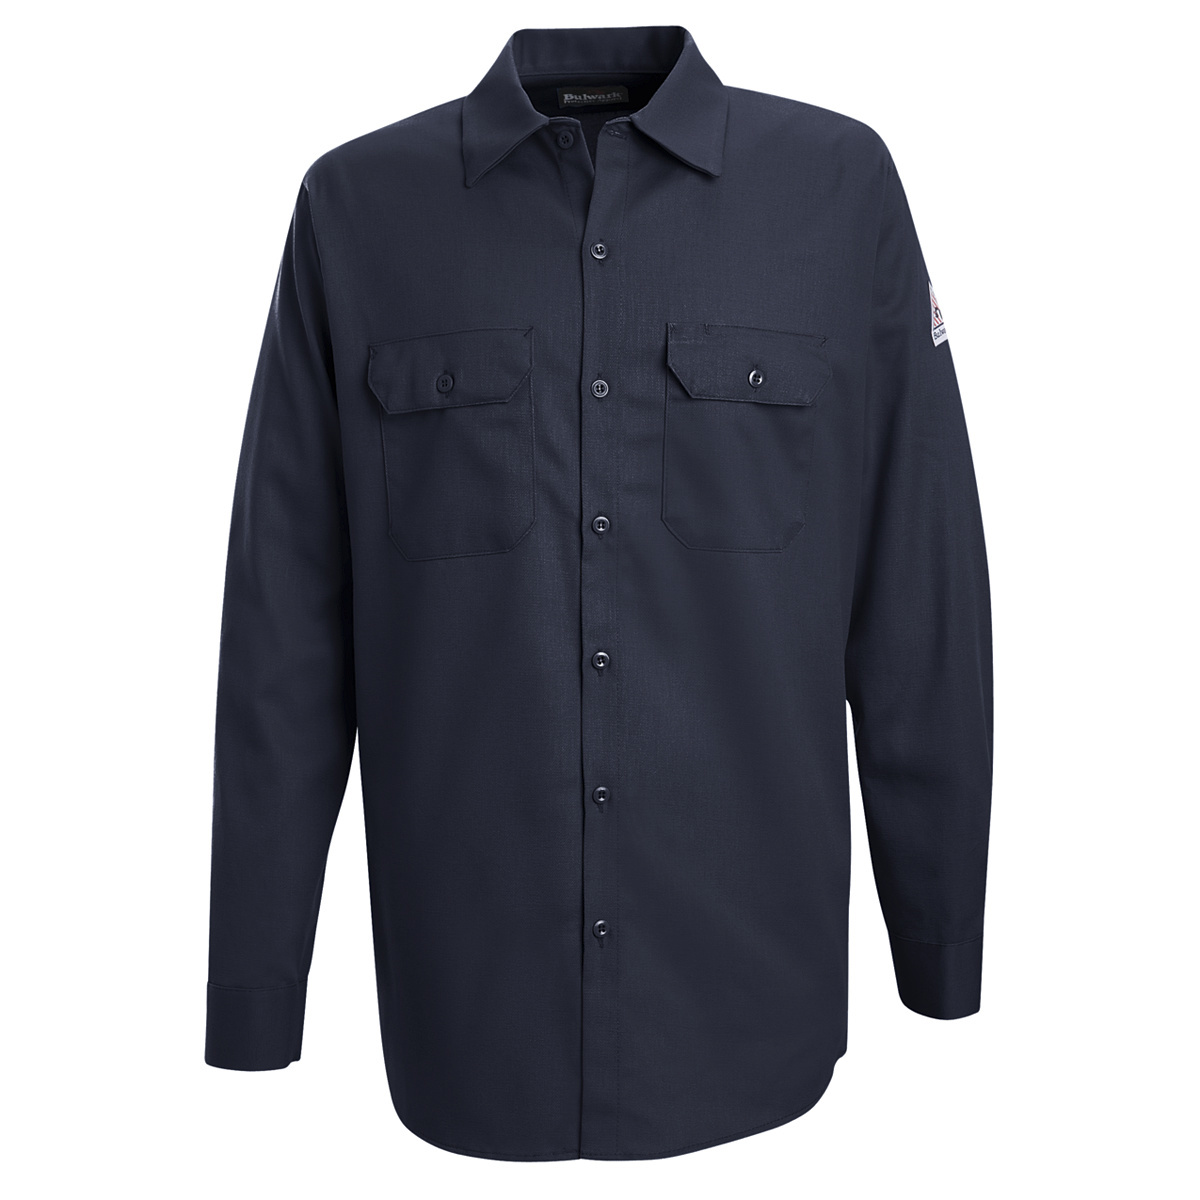 Bulwark® X-Large Tall Navy Blue EXCEL FR® Cotton Flame Resistant Work Shirt With Button Front Closure